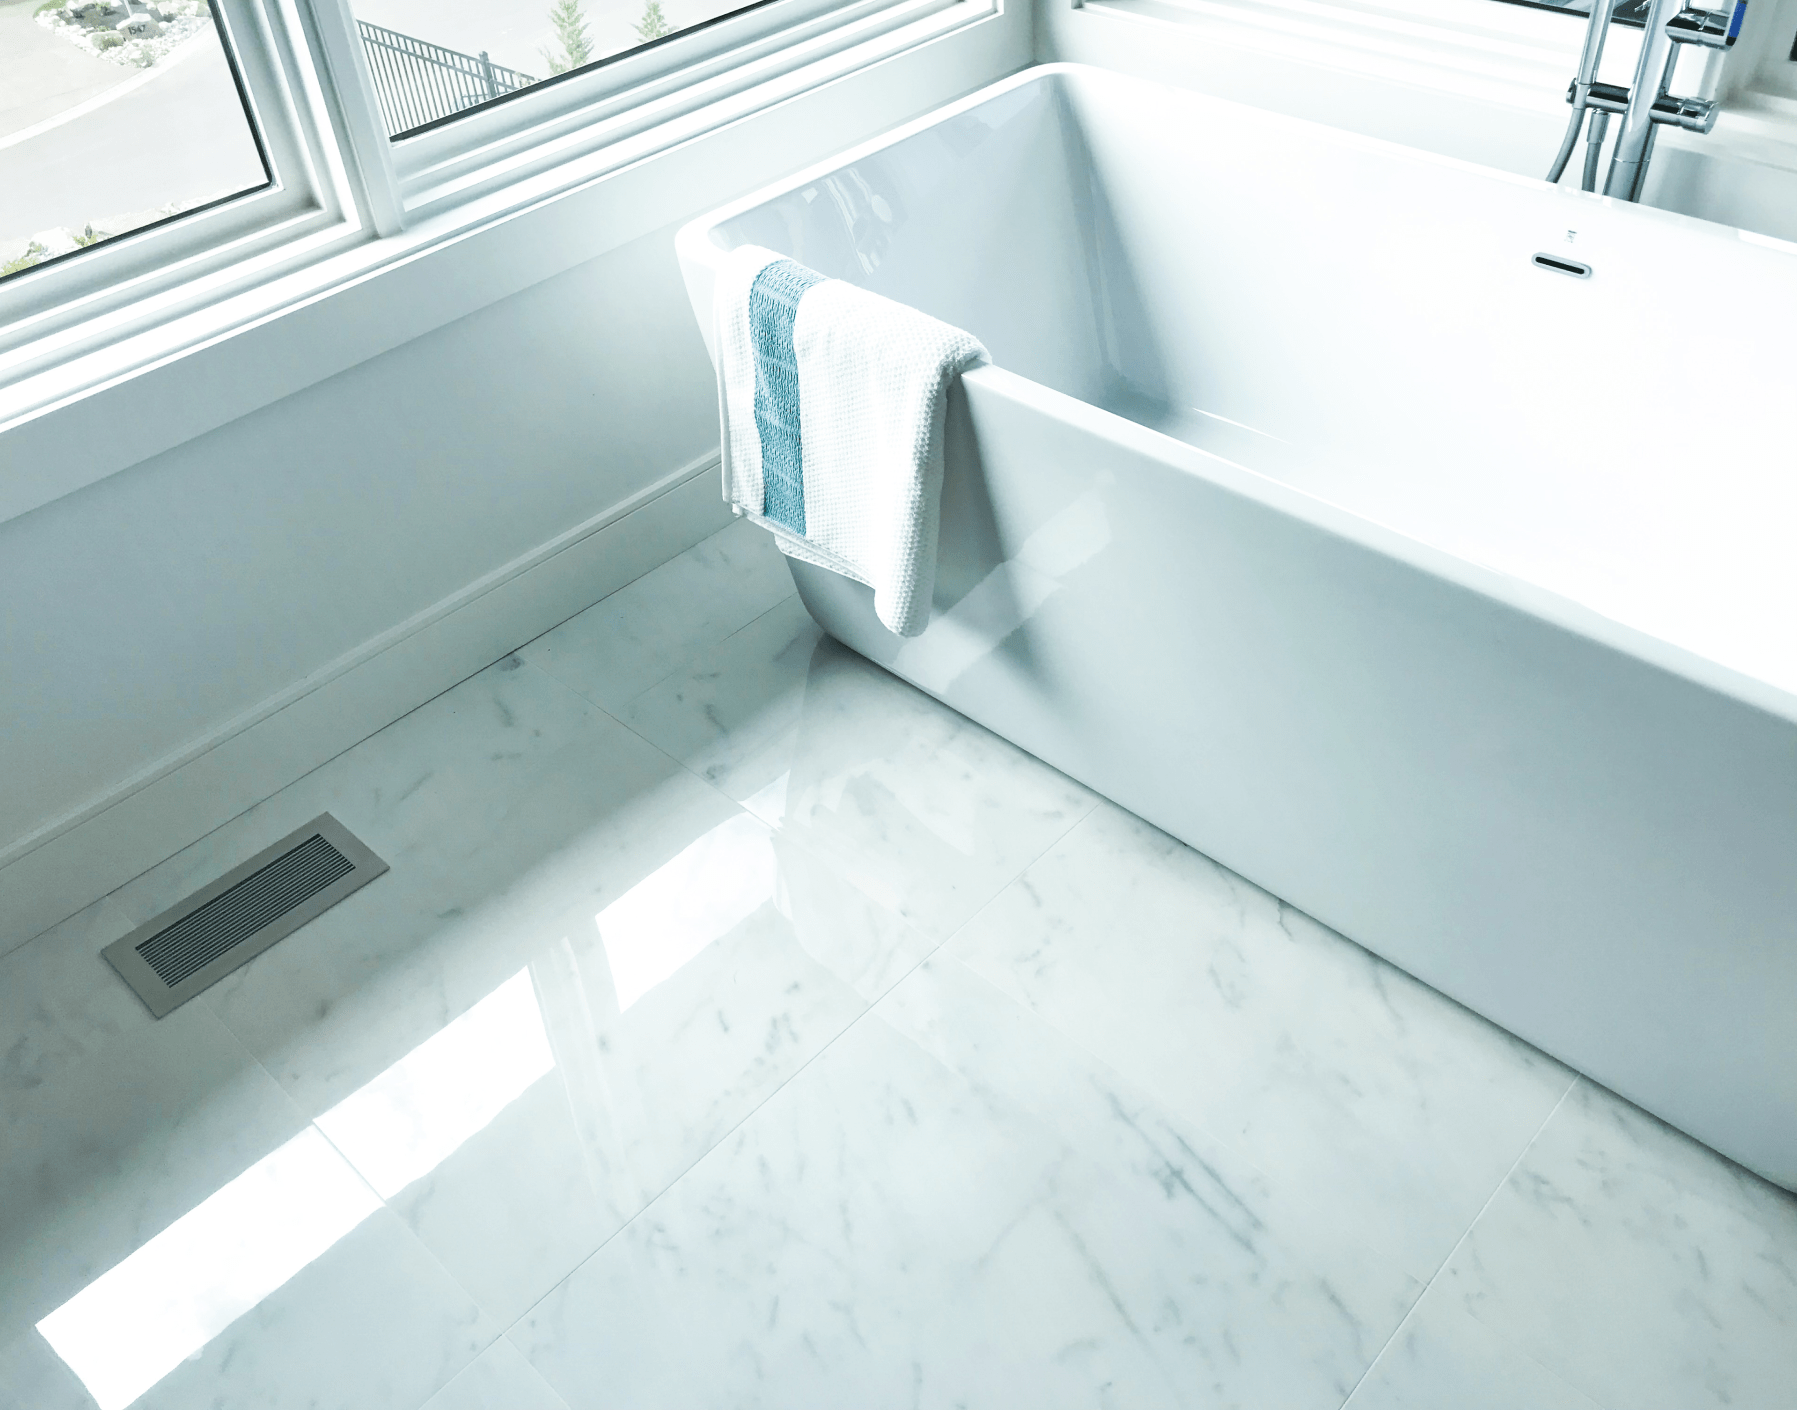 kul grilles anodized clear vent cover in contemporary luxury bathroom